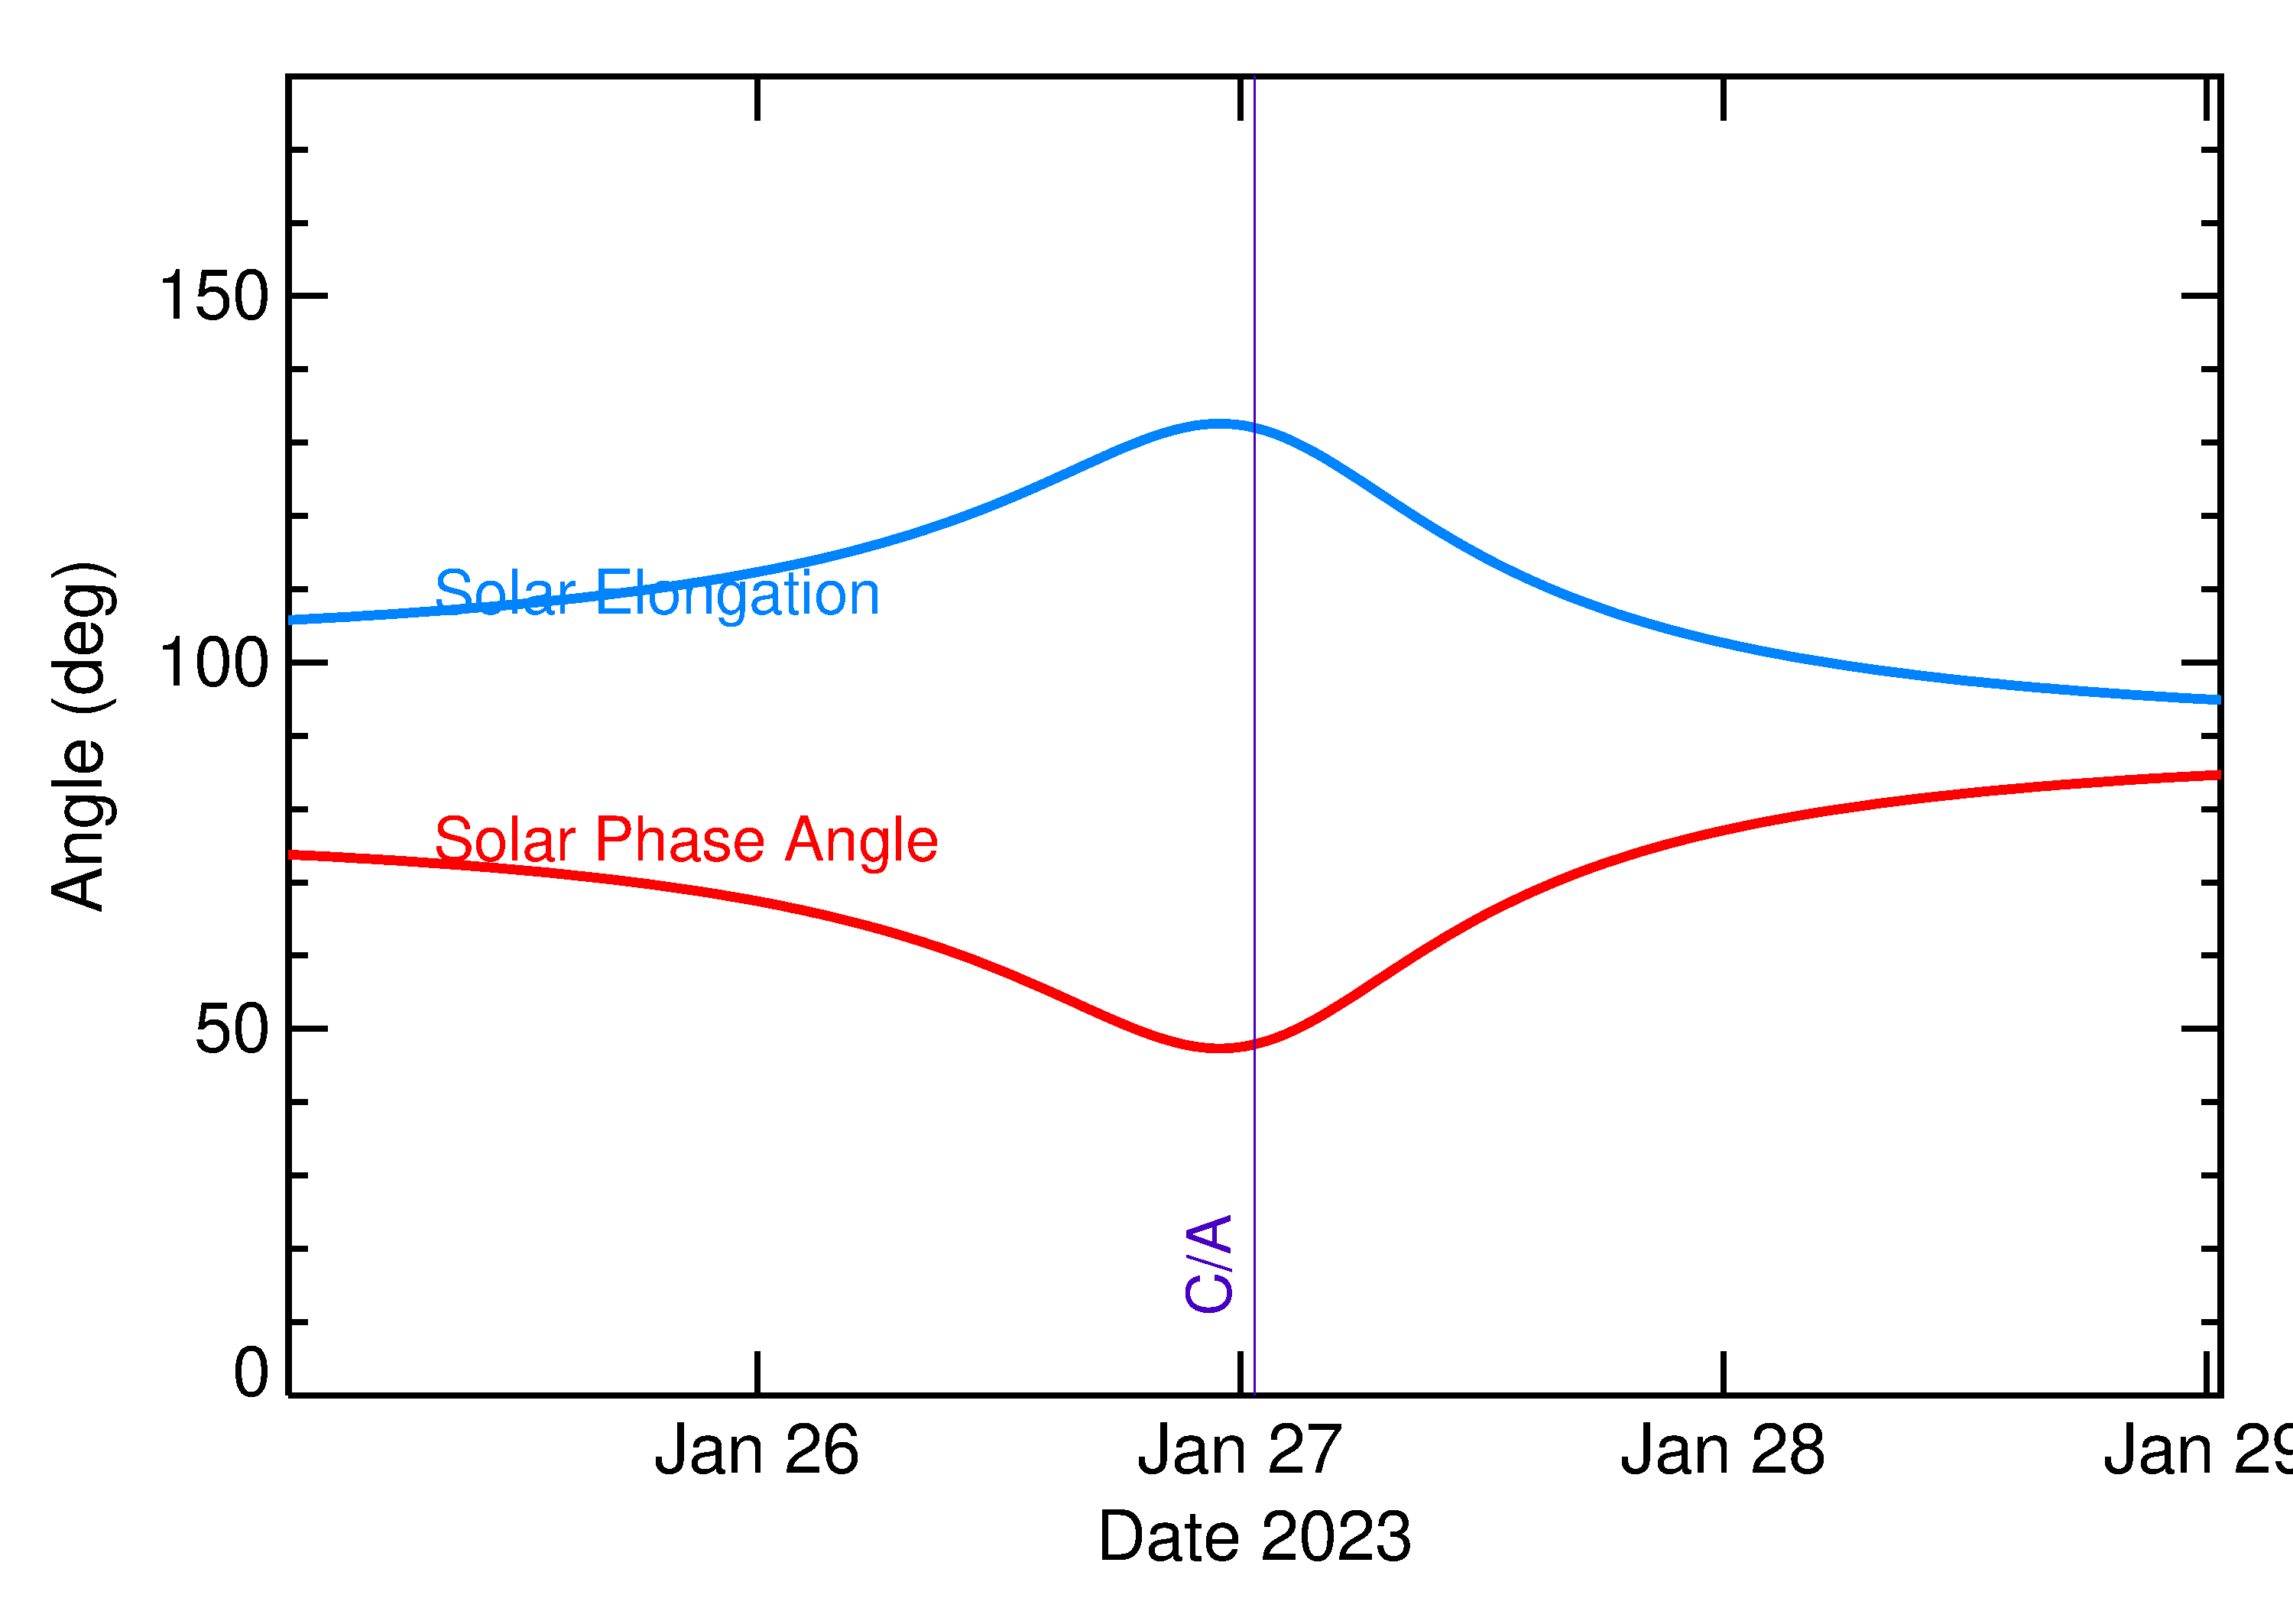 Solar Elongation and Solar Phase Angle of 2023 BZ3 in the days around closest approach